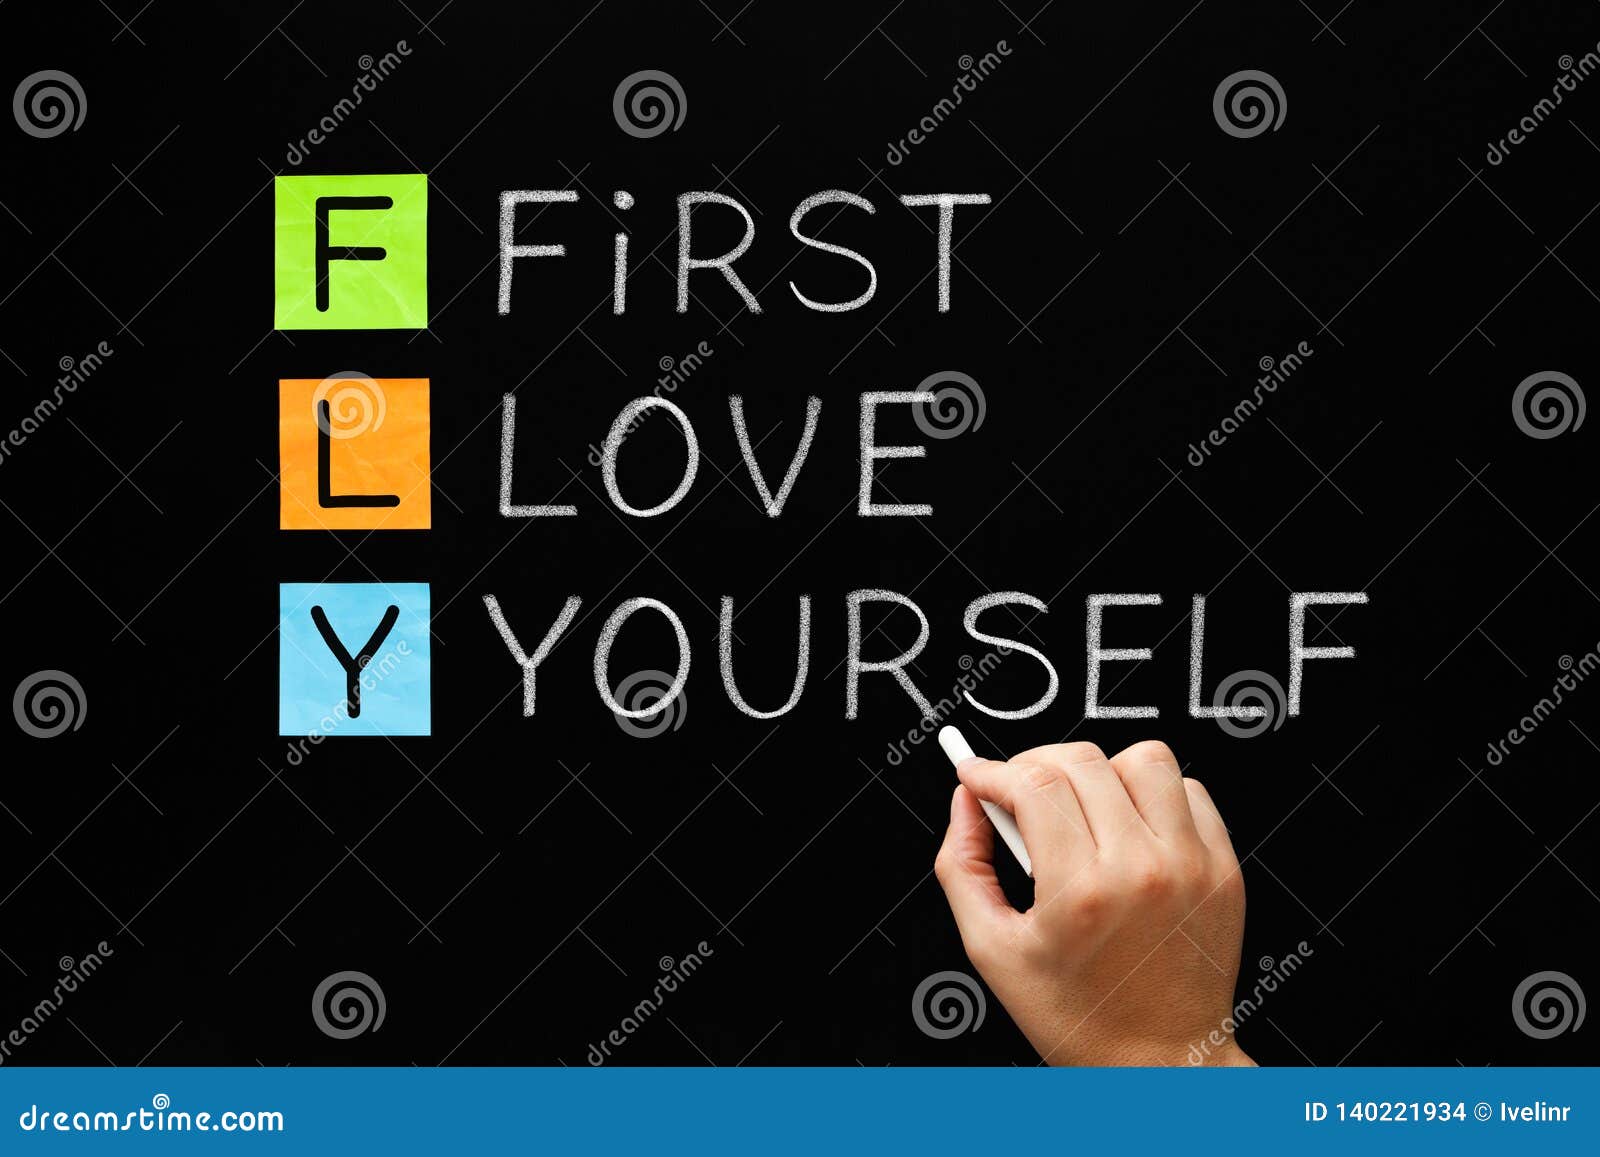 Download FLY - First Love Yourself Acronym Concept Stock Photo ...